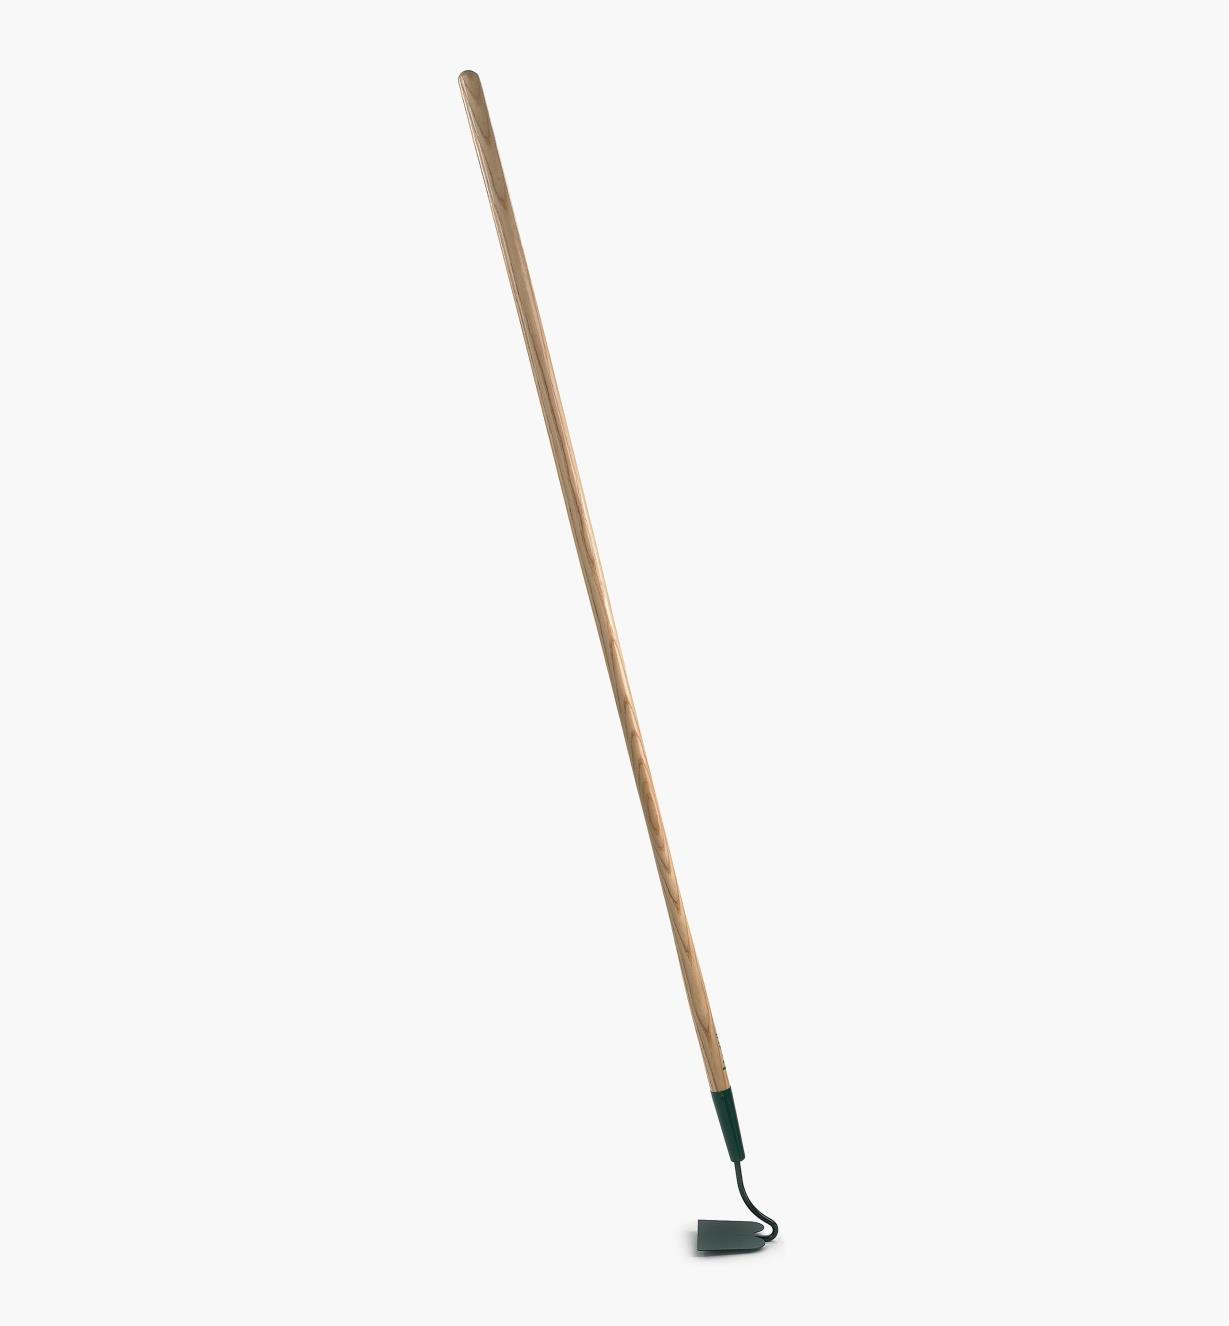 PD343 - Lee Valley Slim Draw Hoe